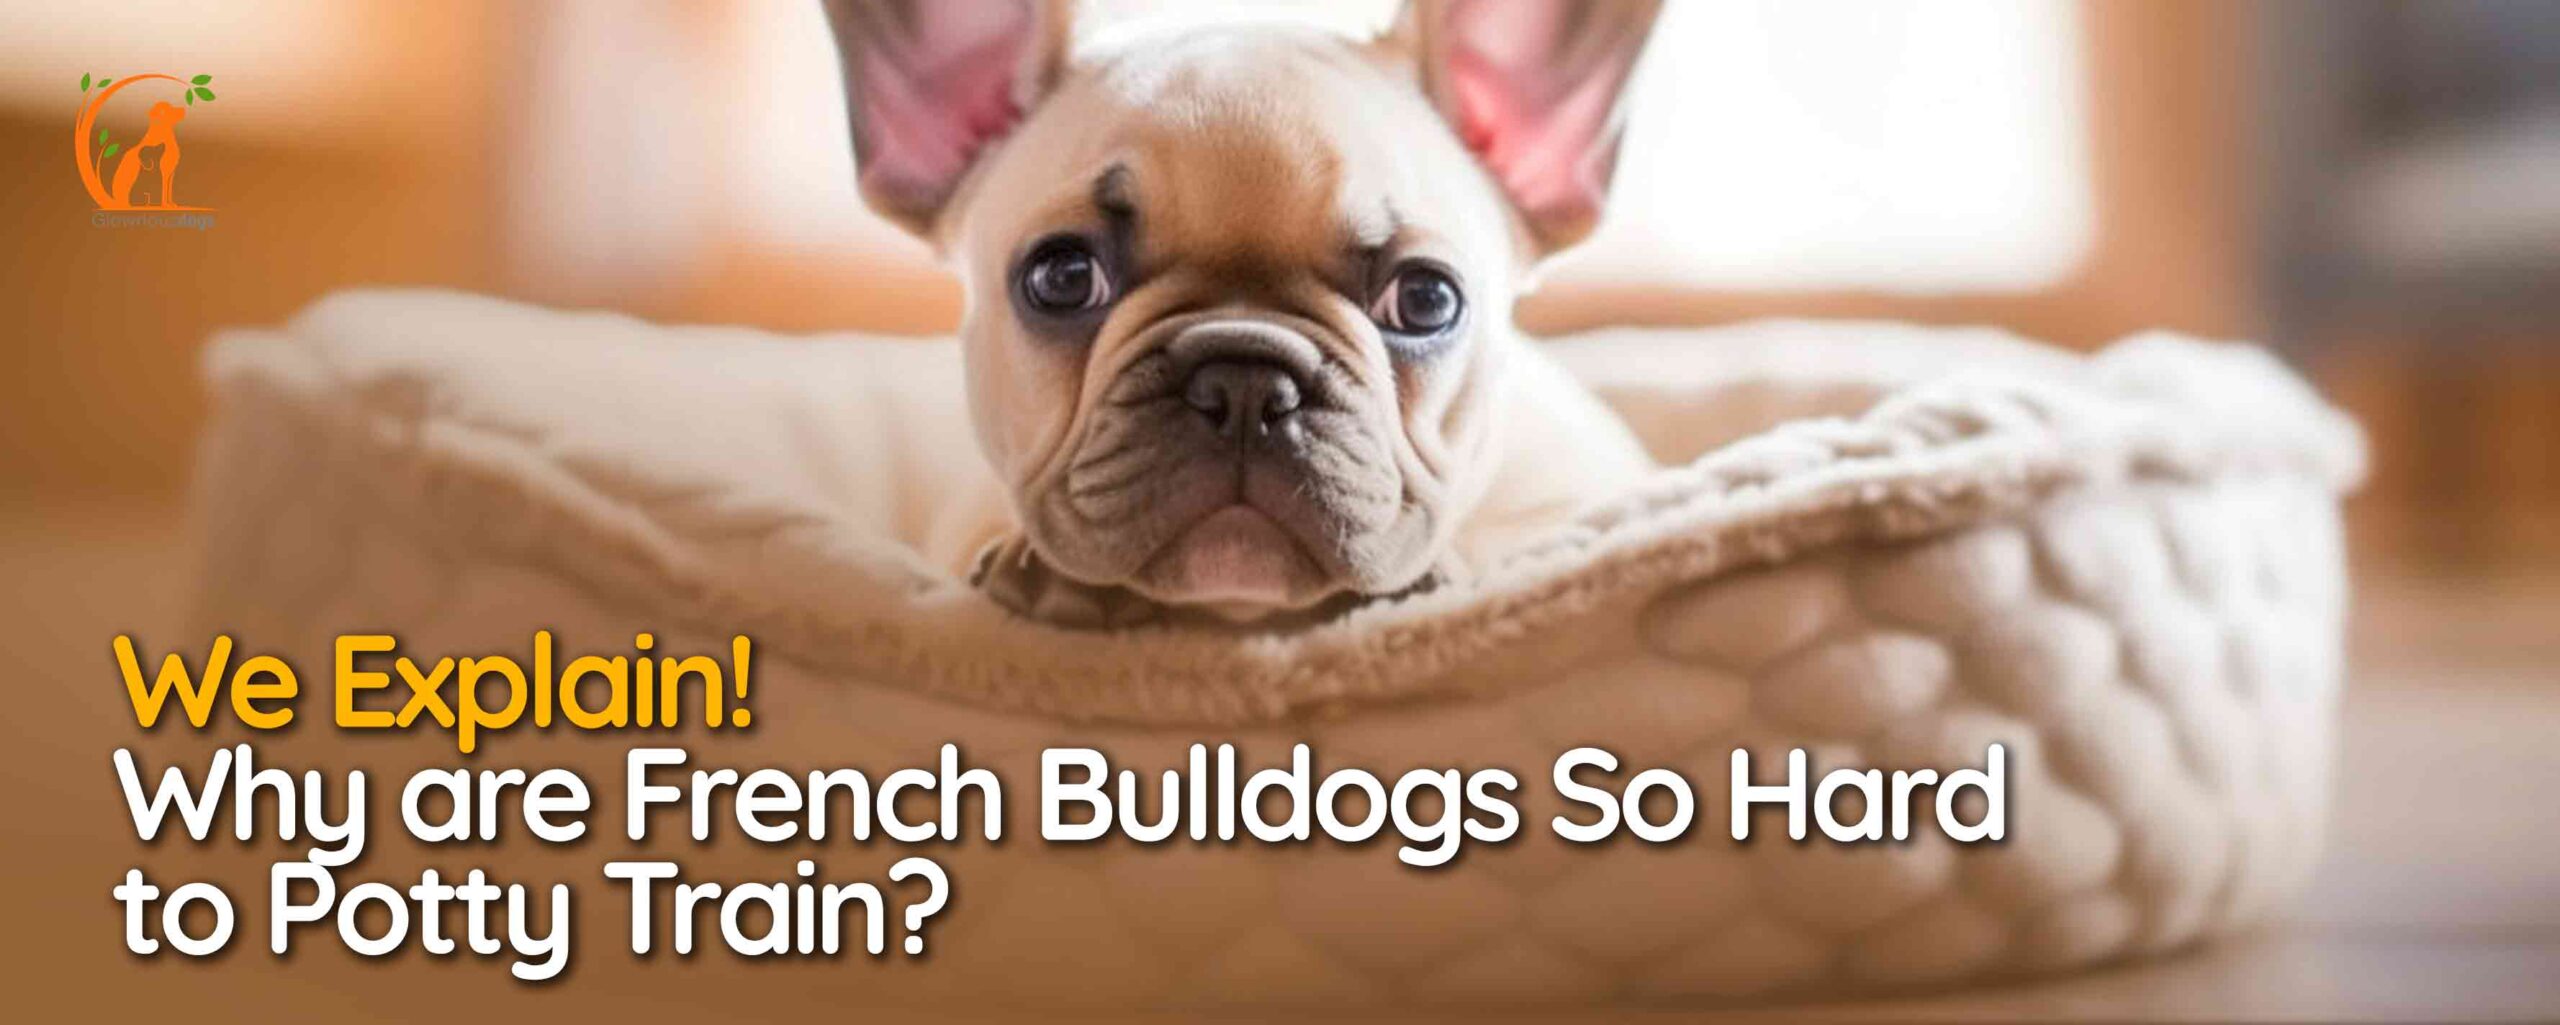 Why are French Bulldogs So Hard to Potty Train